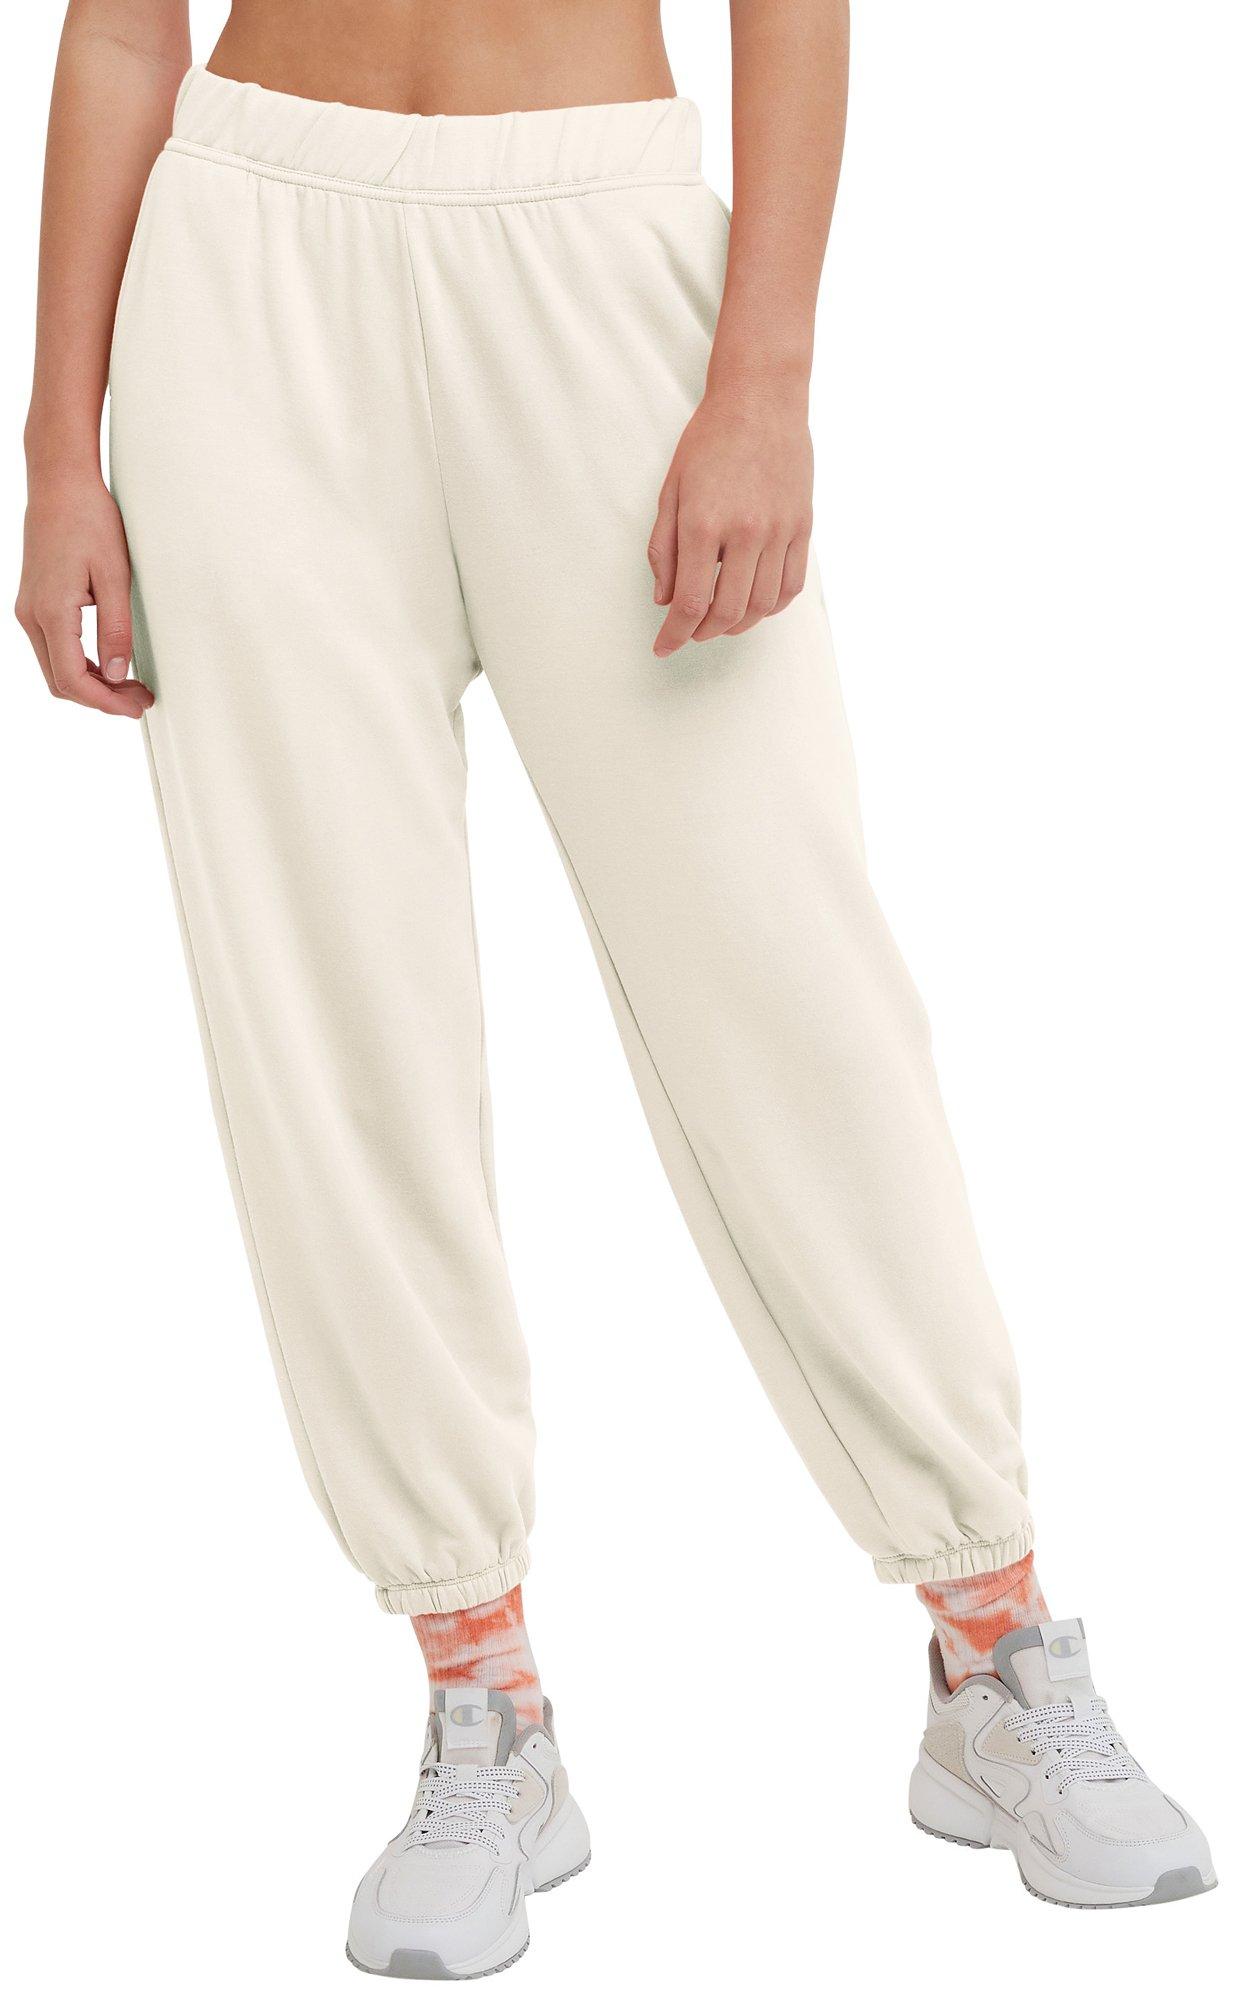 Womens Soft Touch Sweatpants